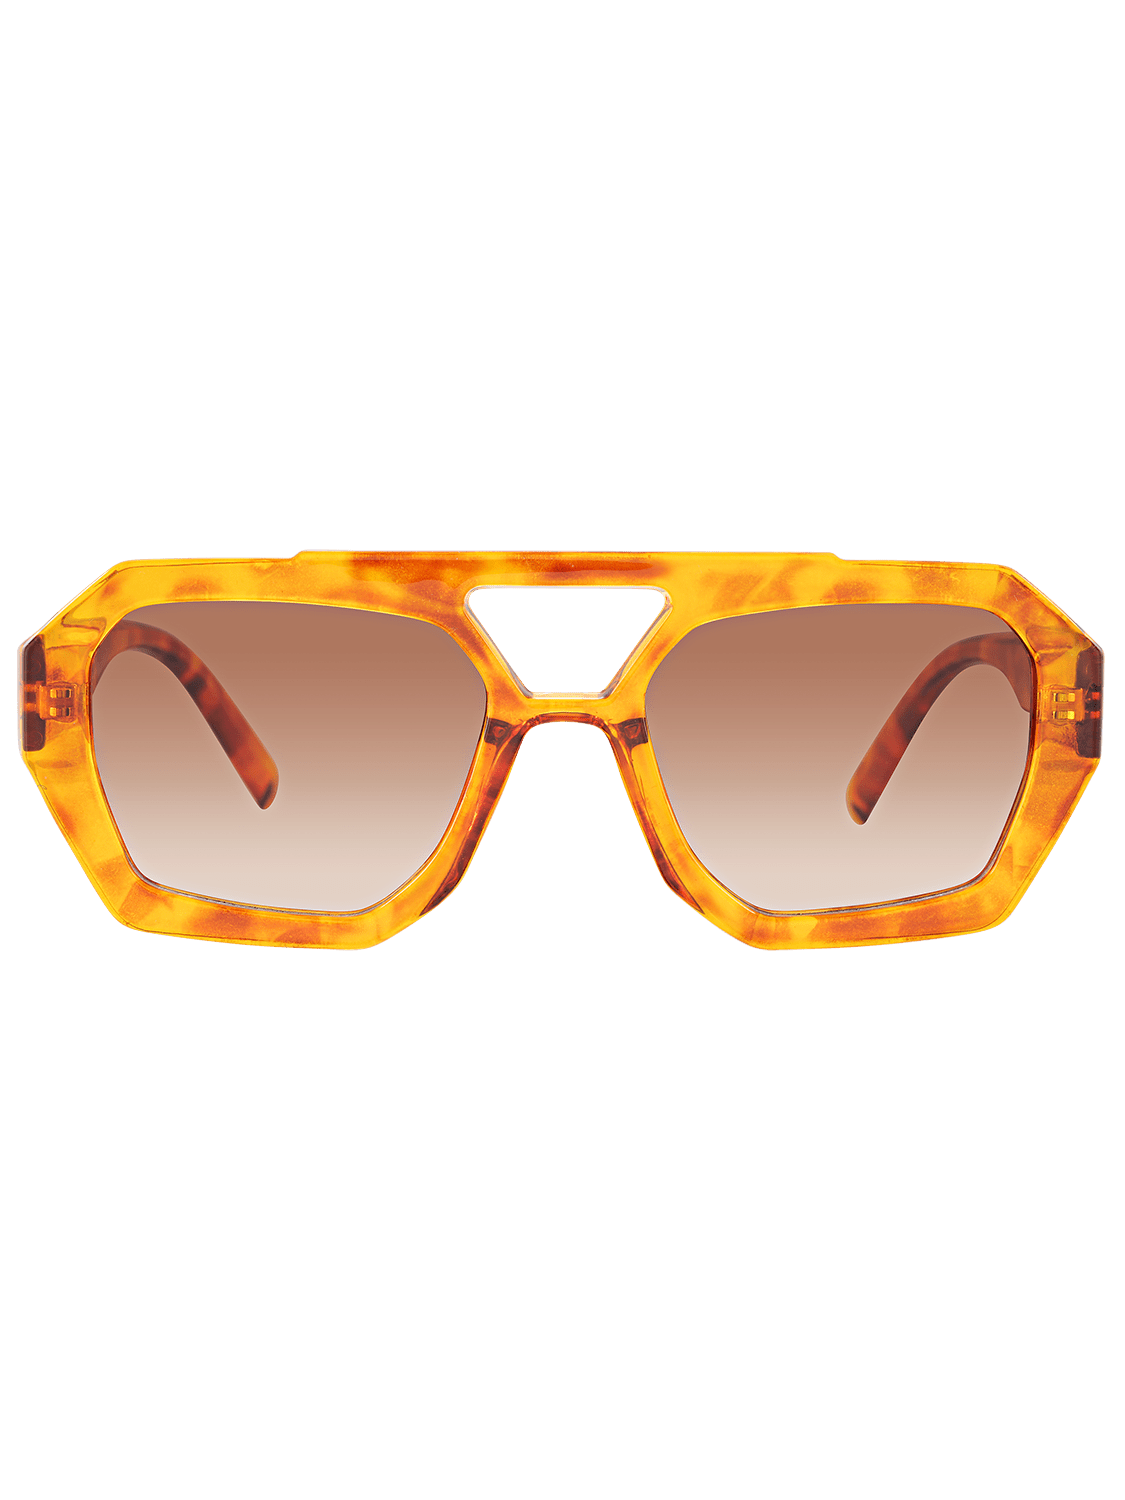 Front view of cool new marmalade orange large frame sunglasses